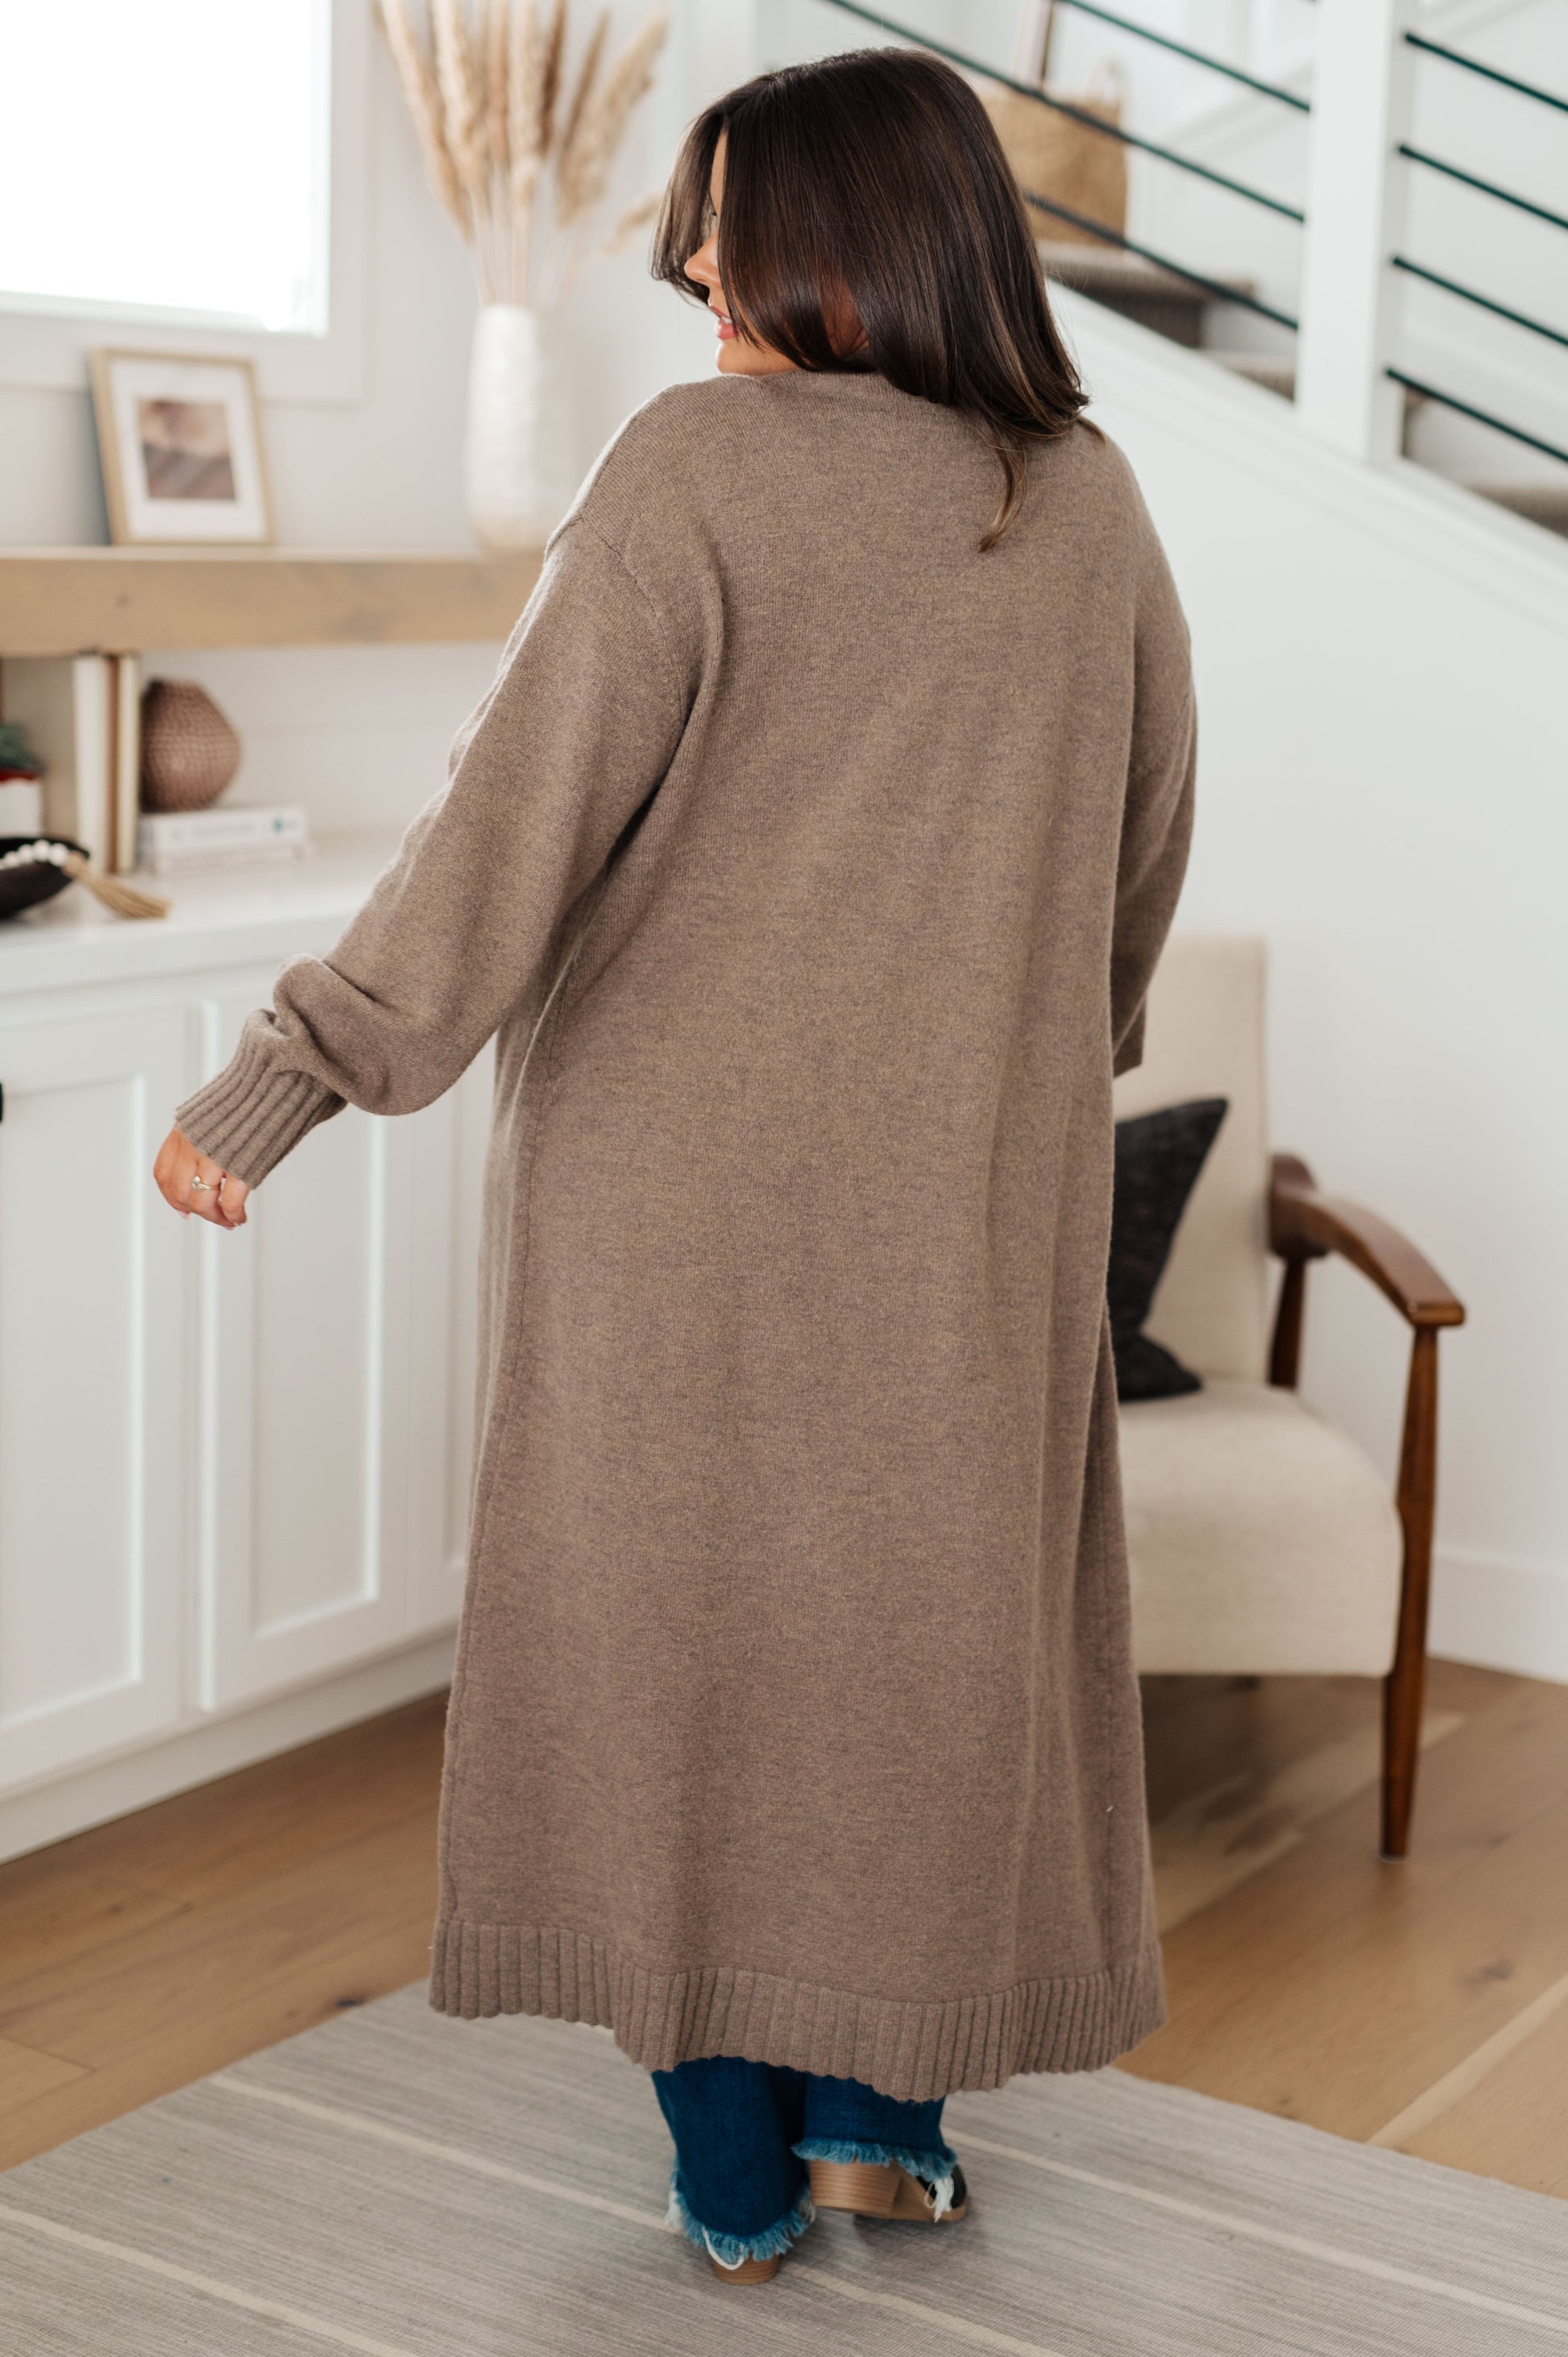 Upgrade your wardrobe this season with this Perfectly Resolved Duster Cardigan. Featuring a warm sweater knit, neutral tone, and duster length, this cardigan pairs perfectly with the perfectly resolved sweater tank for a beautiful timeless look in SLO. plus size